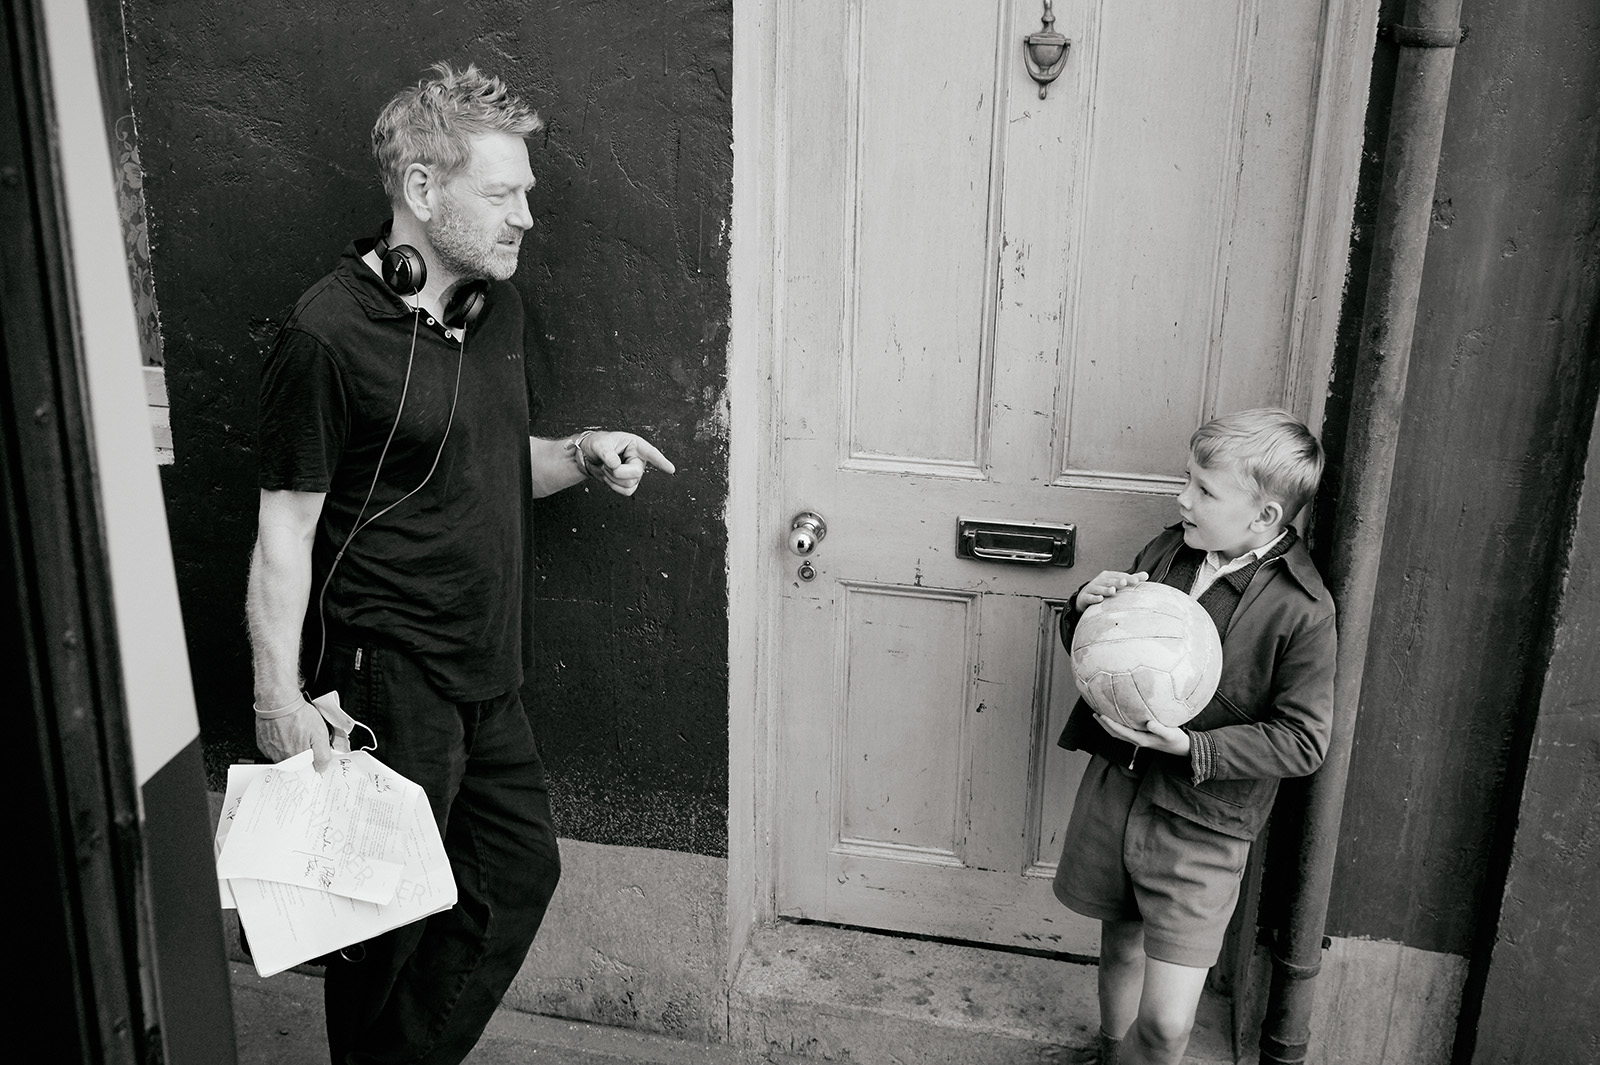 Branagh directs Jude Hill, who plays Buddy in Belfast. Image © Focus Features